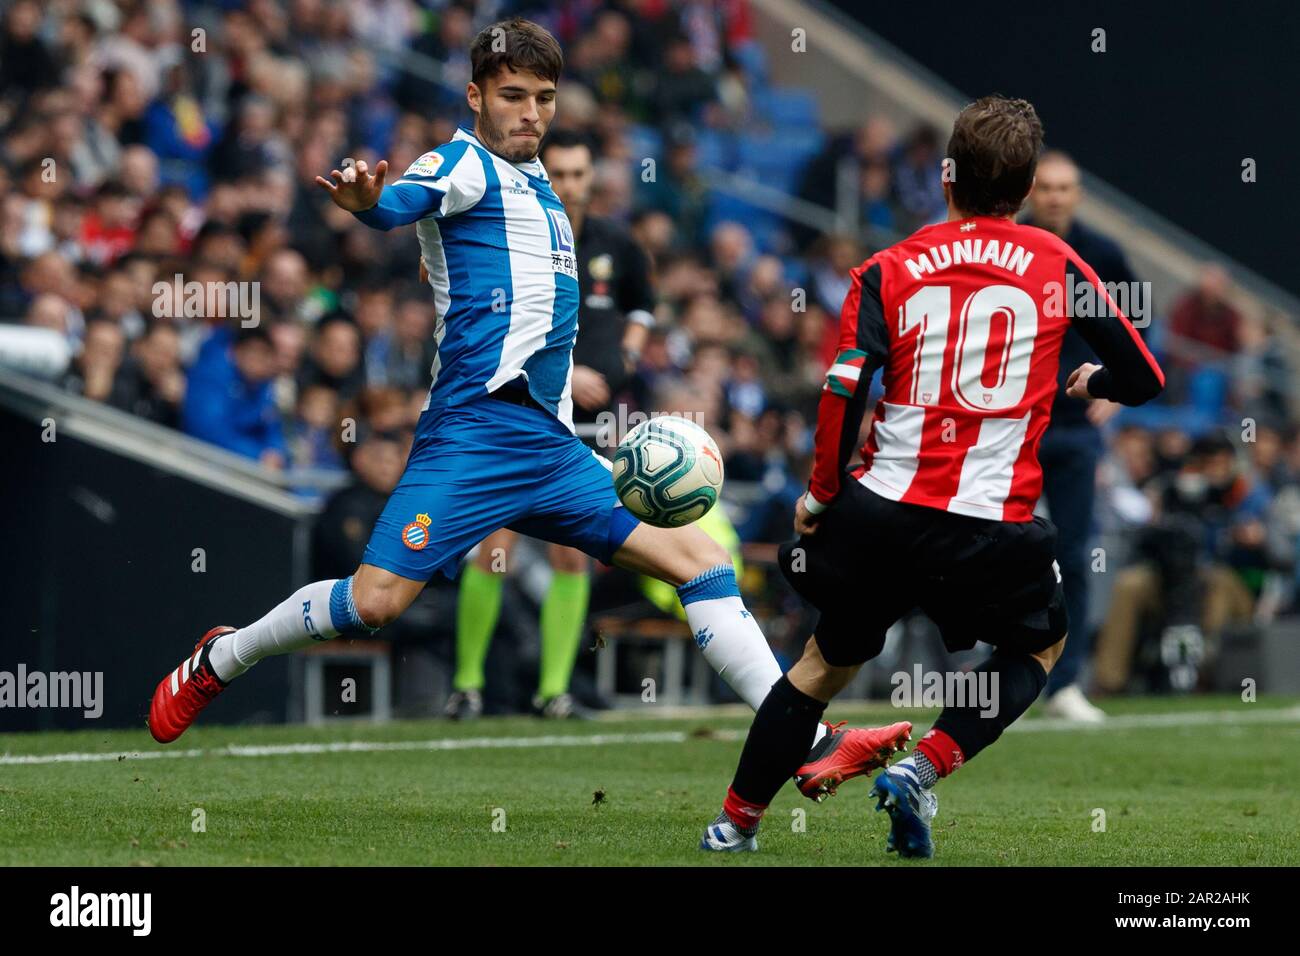 BARCELONA, SPAIN - JANUARY 24:.Luis Lopez of RCD Espanyol during the Liga match between RCD Espanyol and FC Barcelona at RCD Stadium on January 24, 2020 in Barcelona, Spain. (Photo by DAX/ESPA-Images) Stock Photo